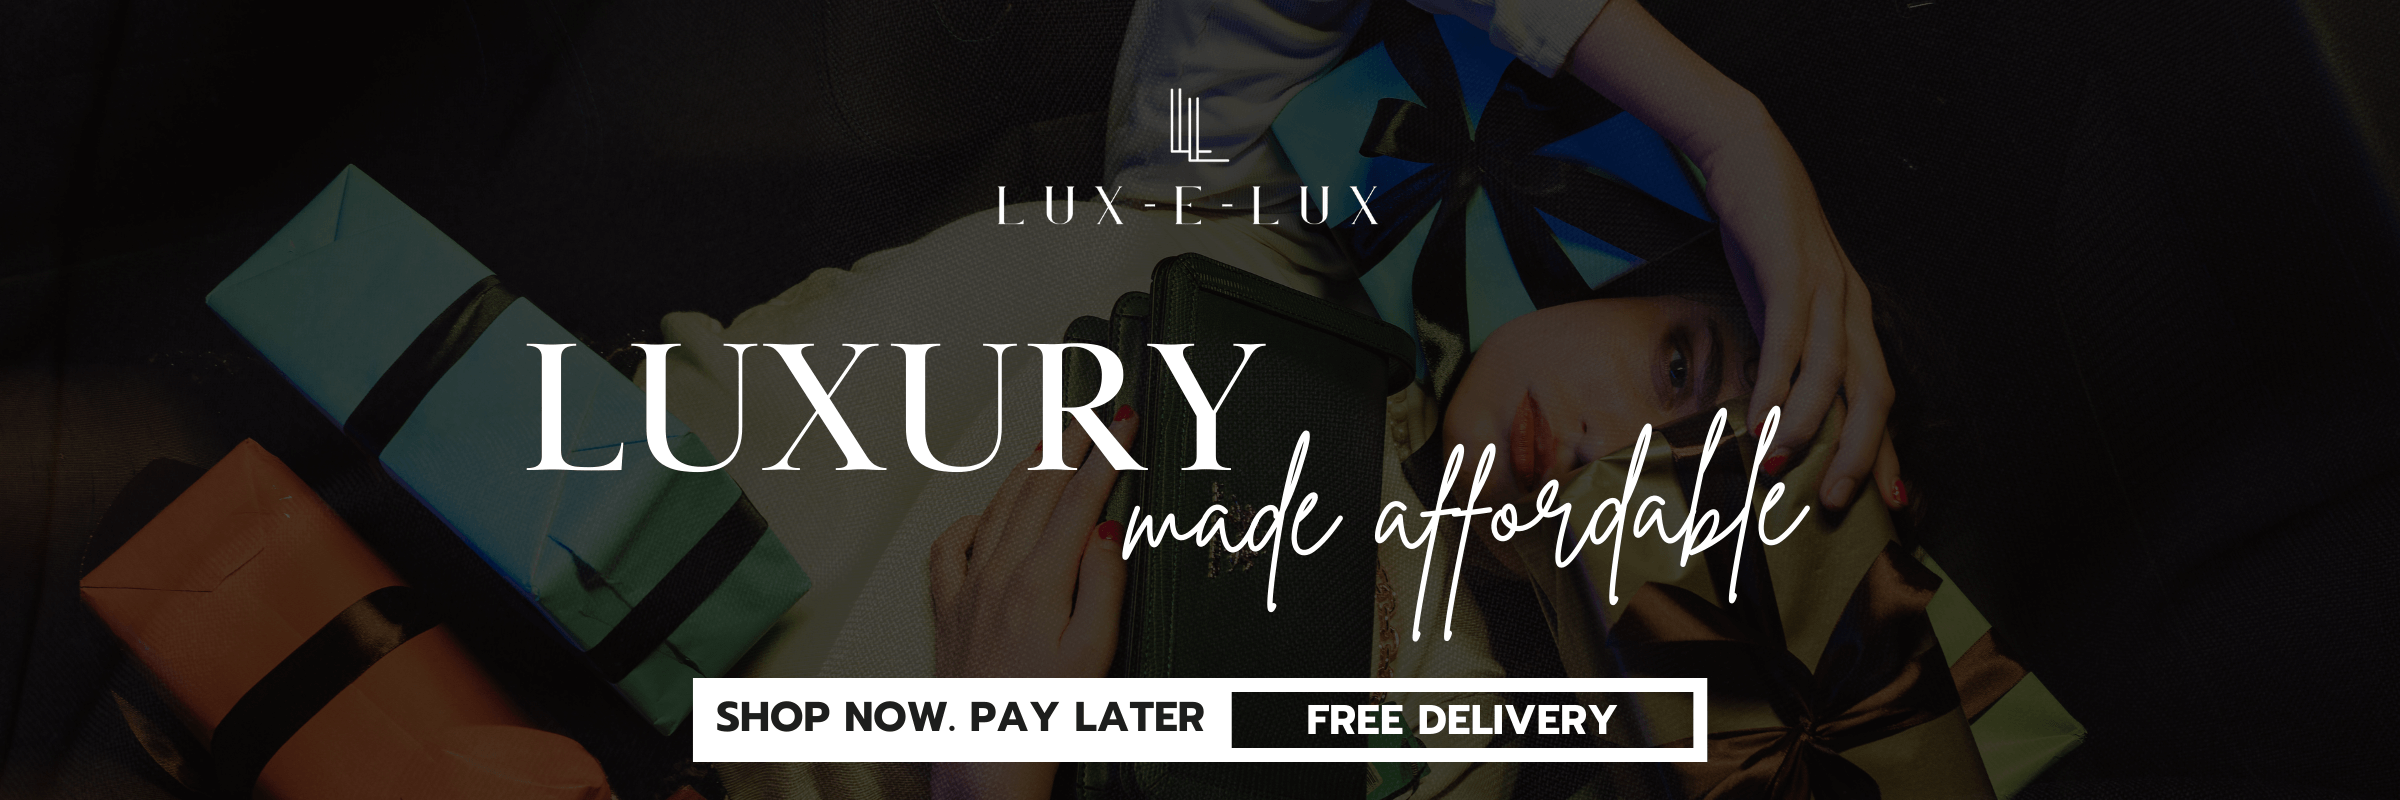 Luxury made affordable. Shop now Pay later